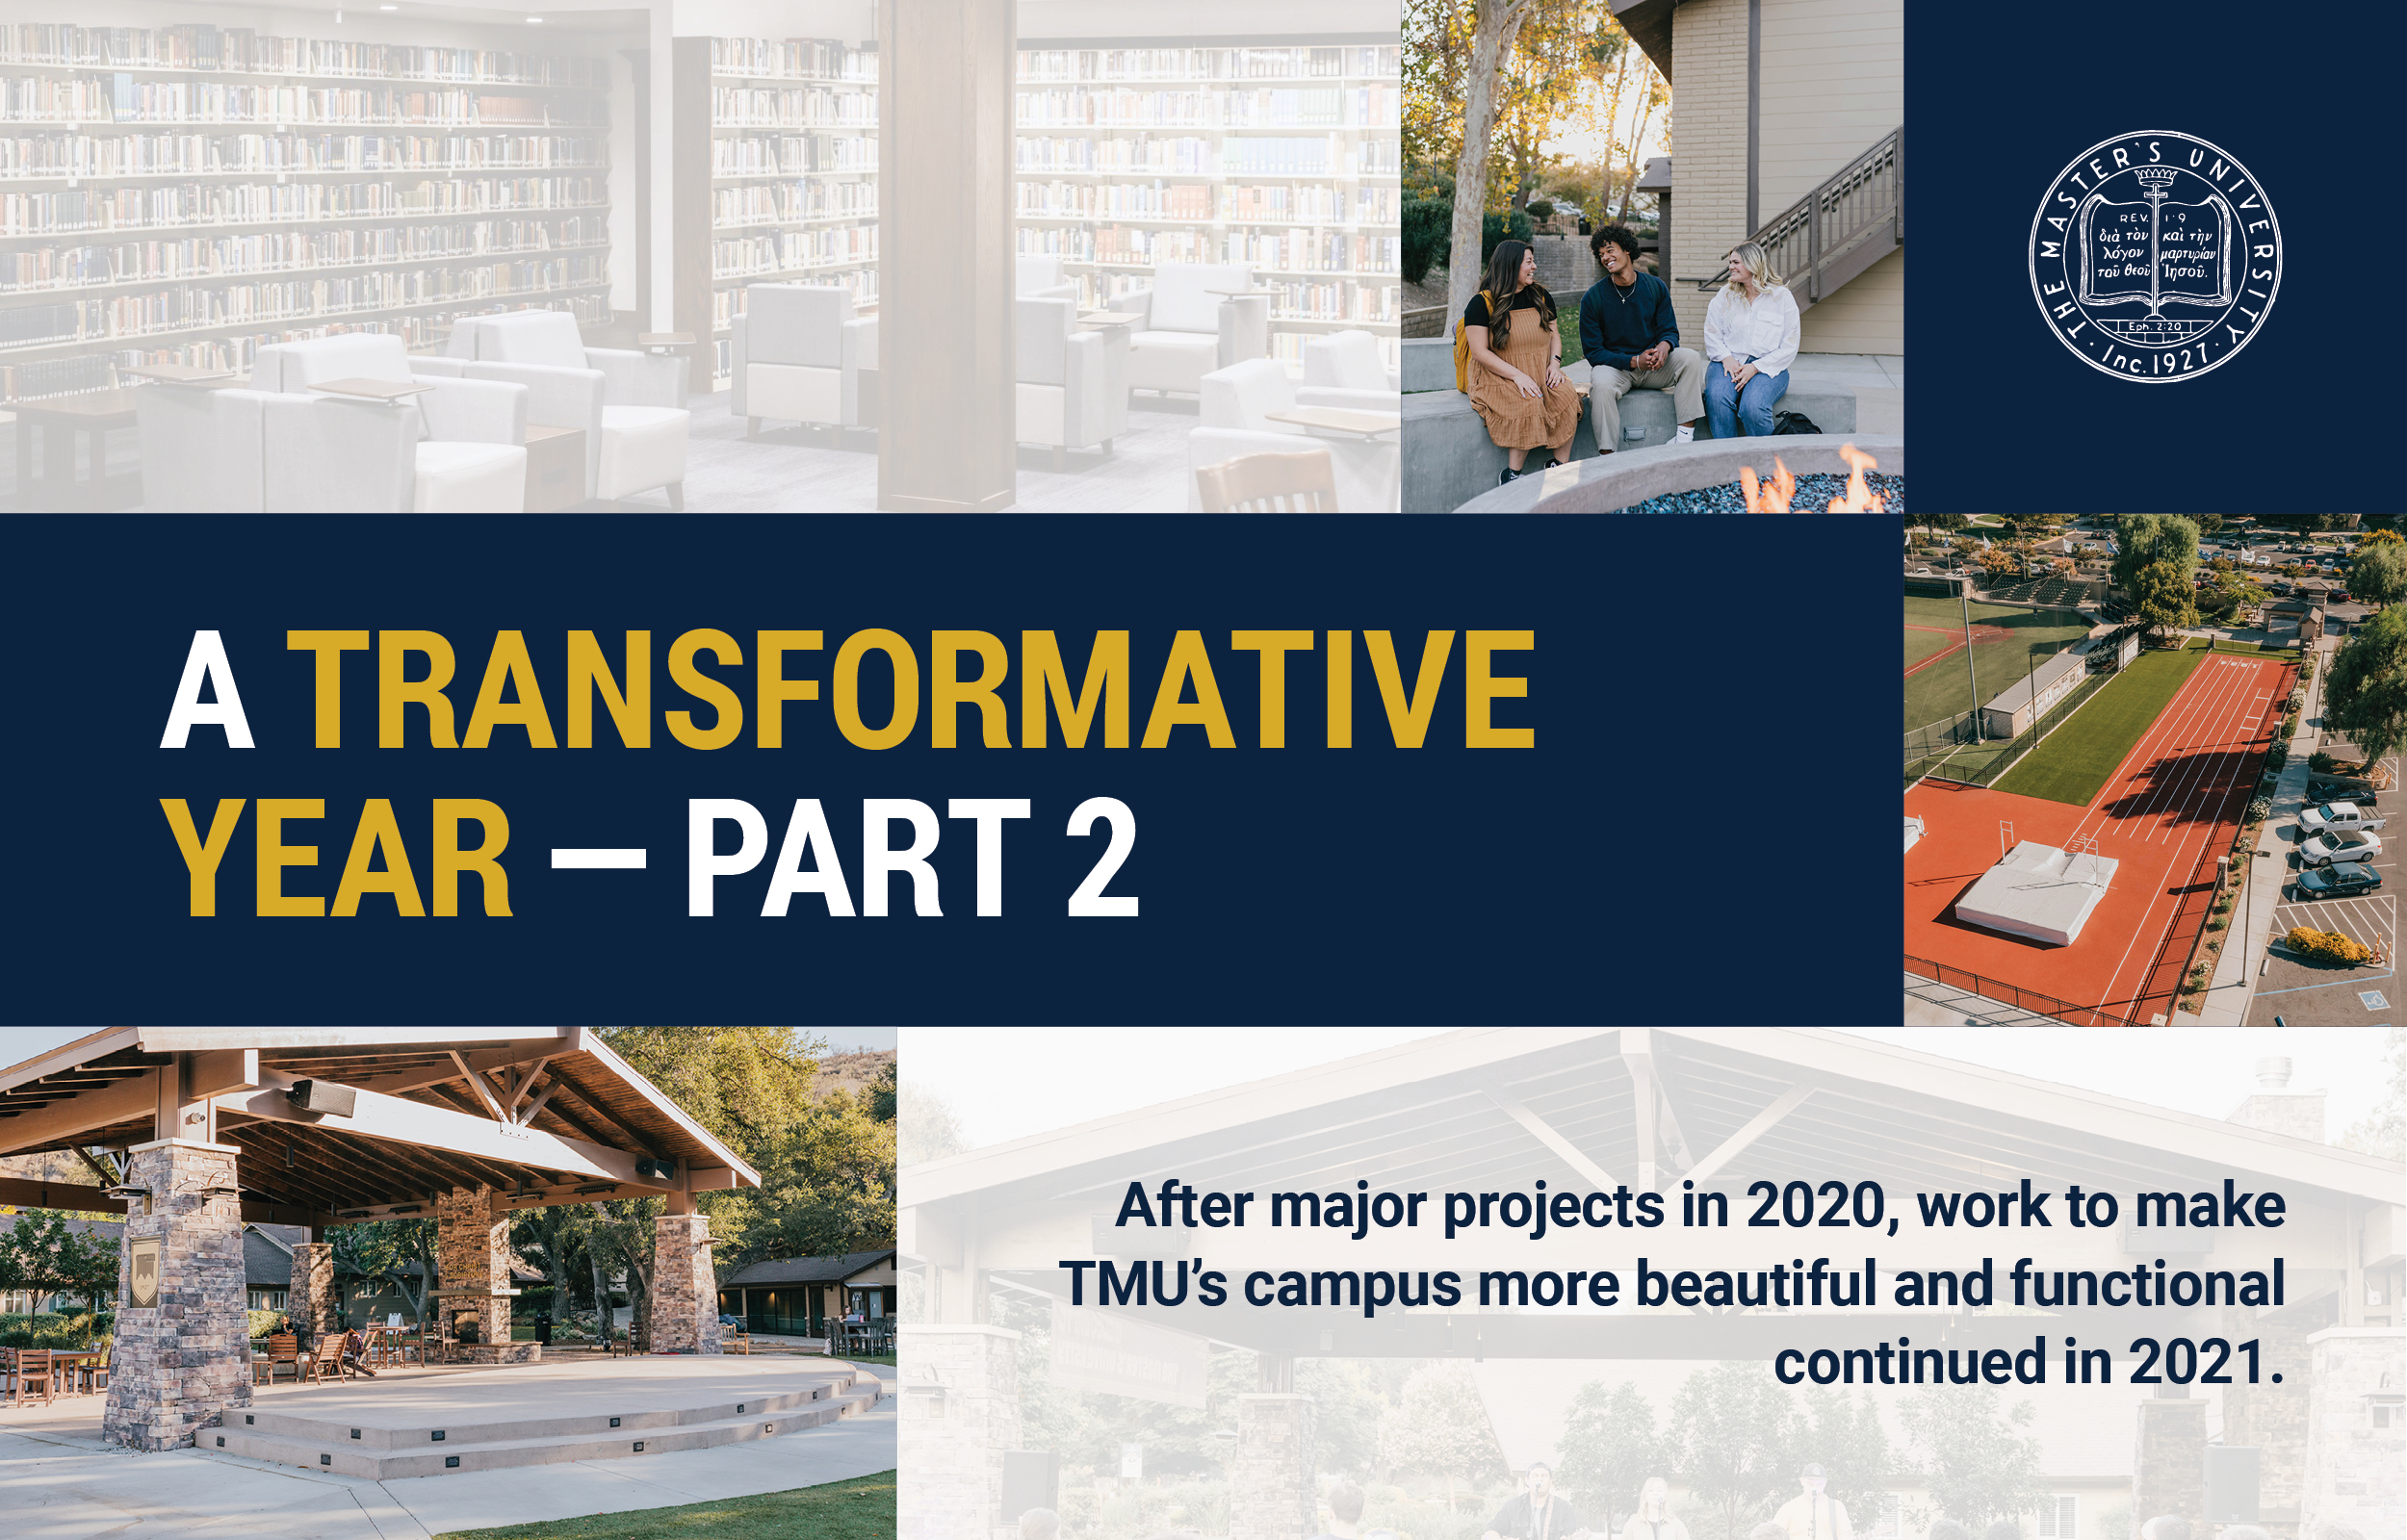 The Transformation of TMU's Campus Continued in 2021 image